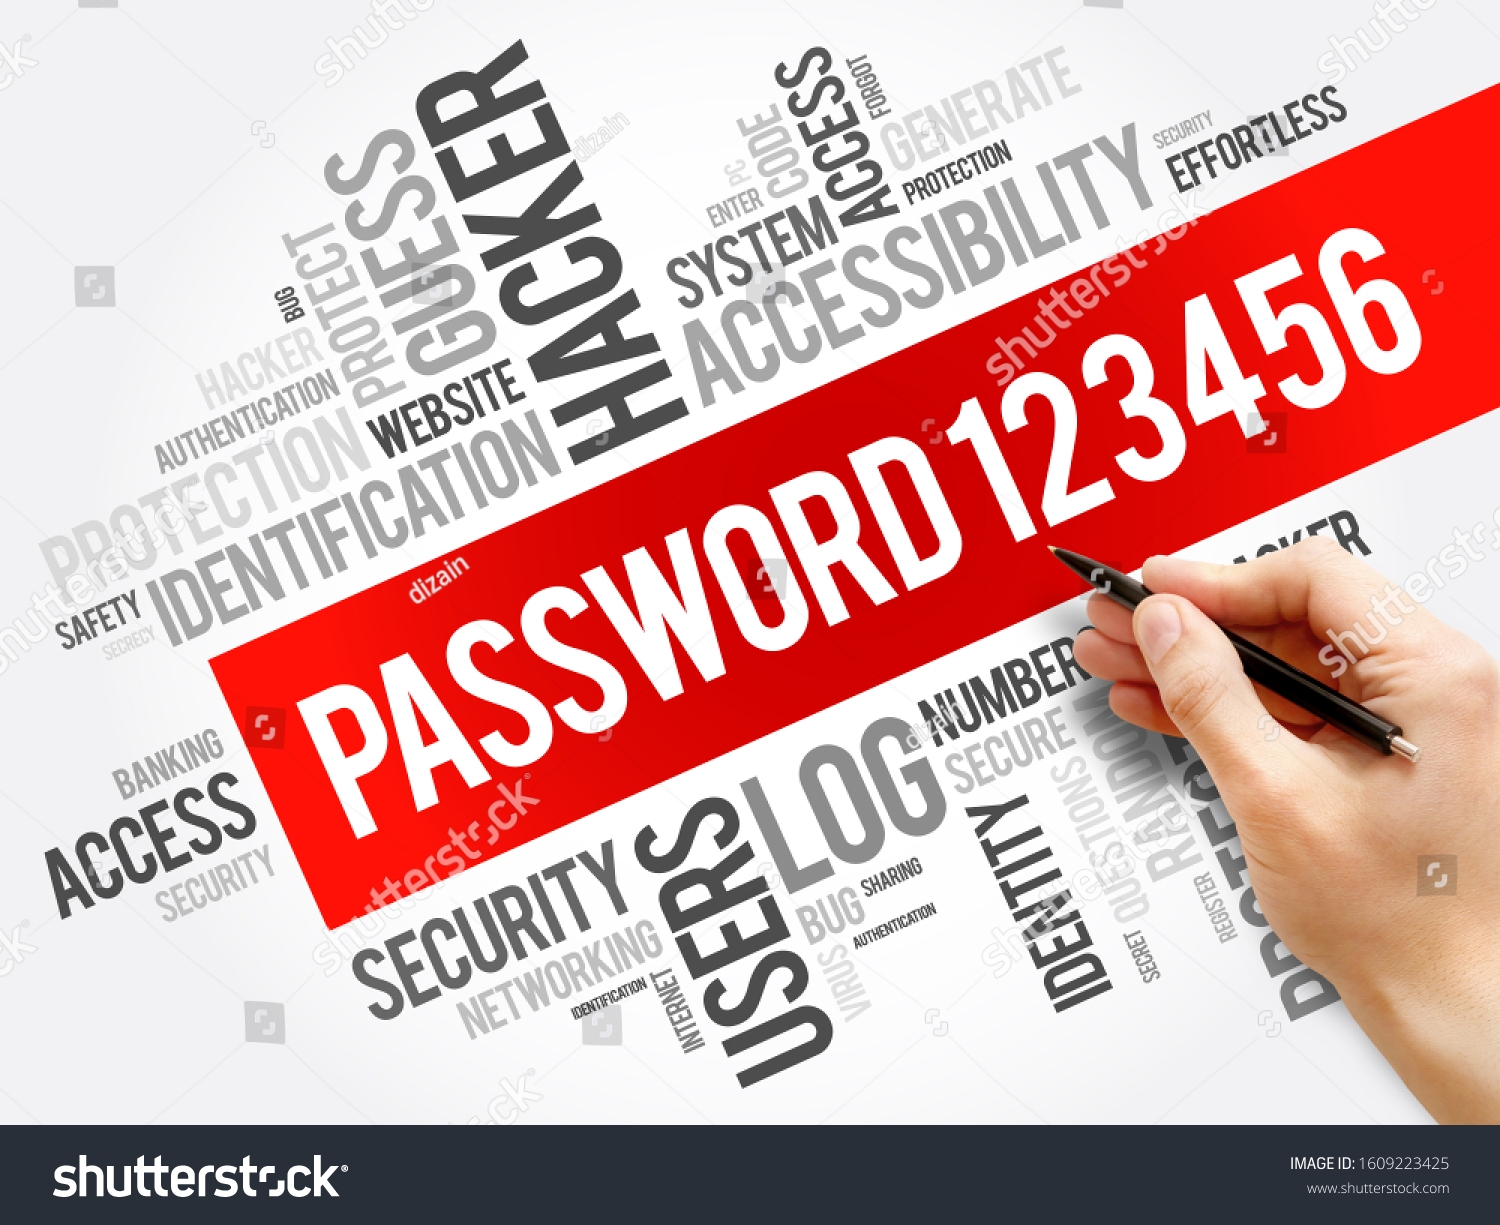 What are the most popular passwords for 2020, 2021